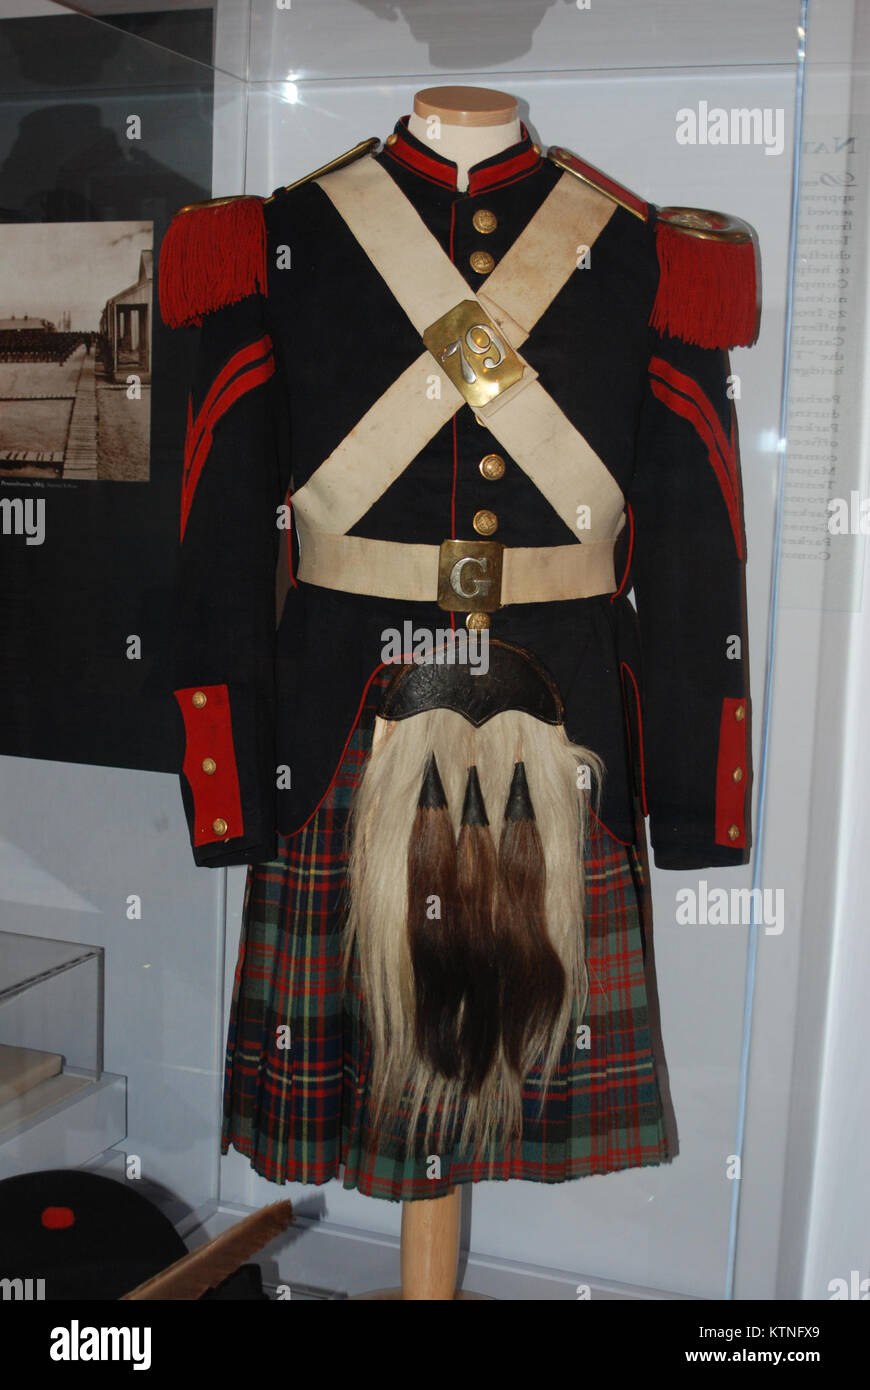 SARATOGA SPRING -- This uniform worn by a member fo the 78th New York  Violunteer Infantry, who called themselves the Highlanders, is among the  items included in the New Civil War exhibit